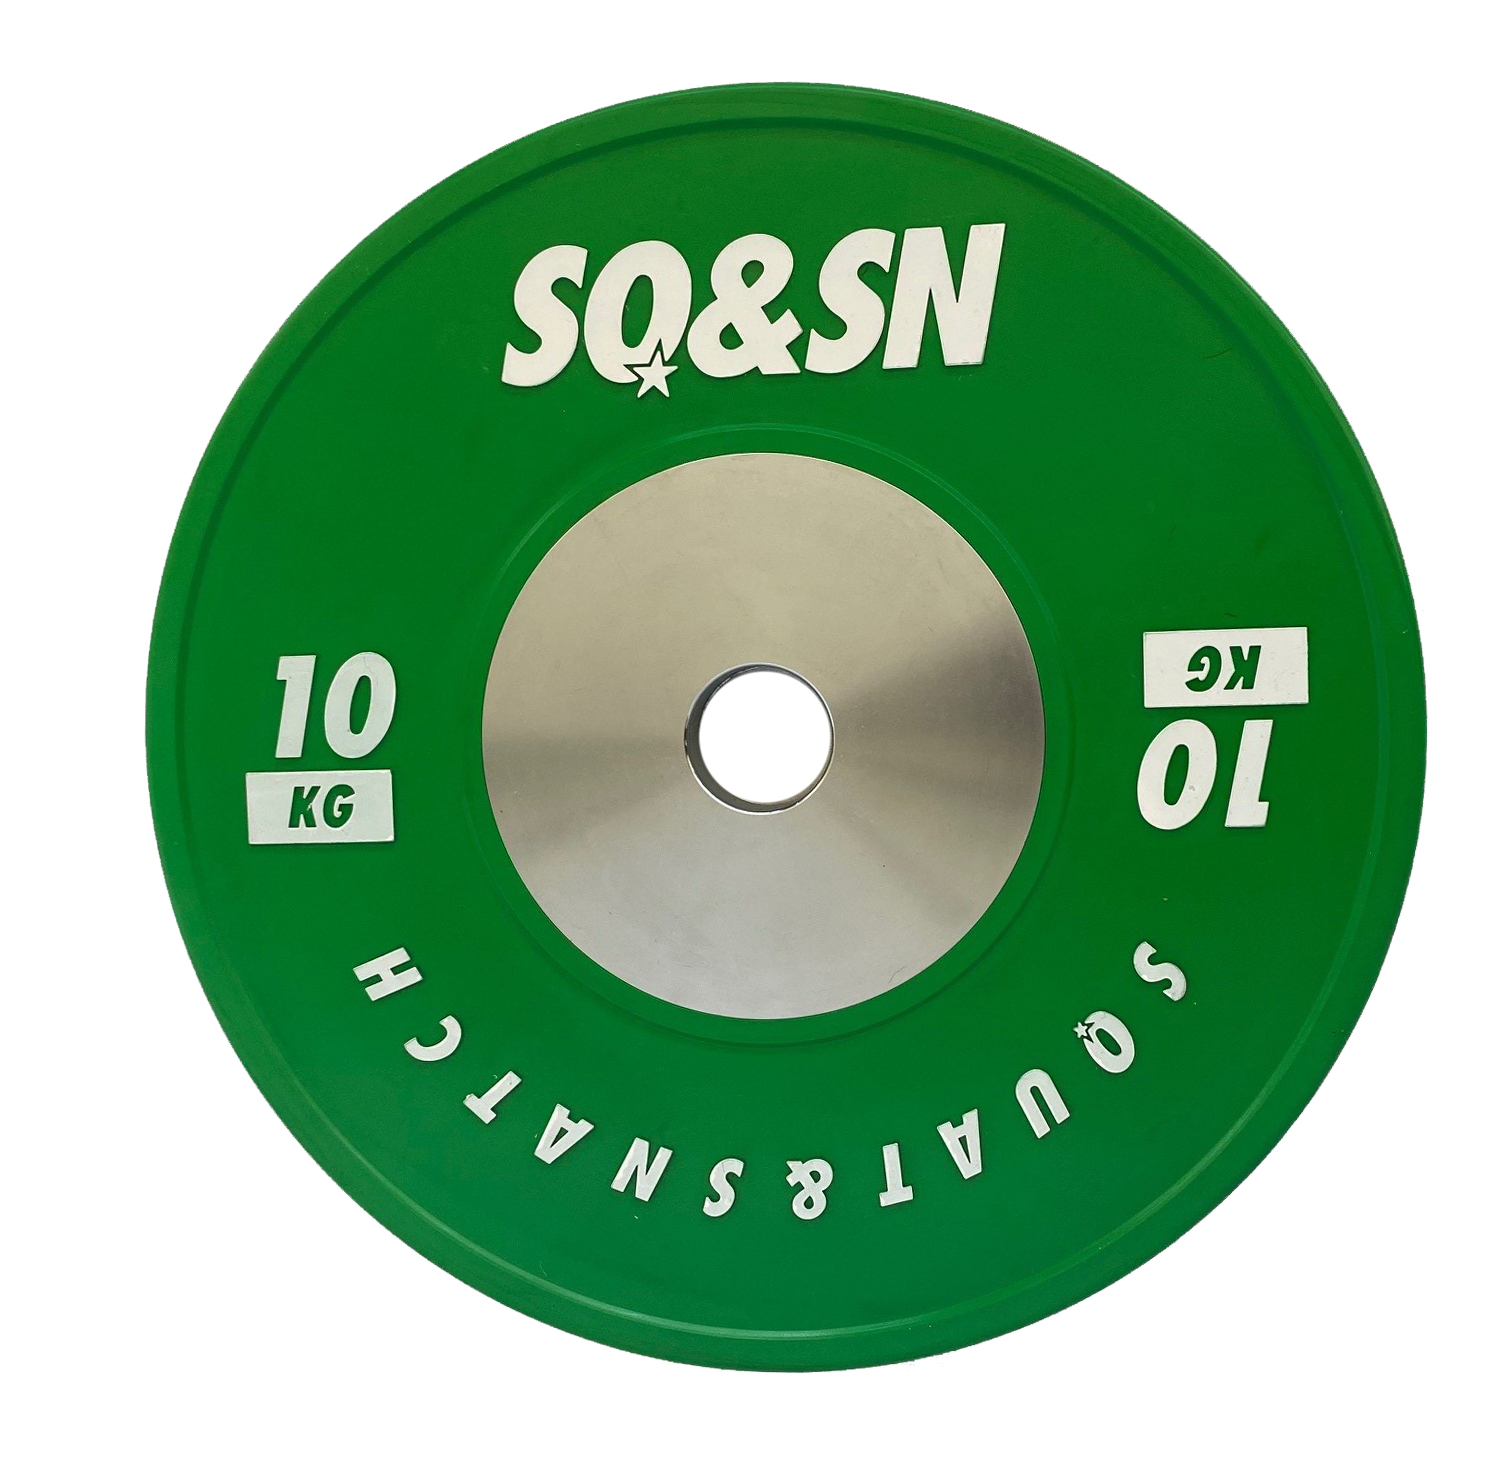 SQ&amp;SN Competition Bumper Plate 10 kg Green - Demo